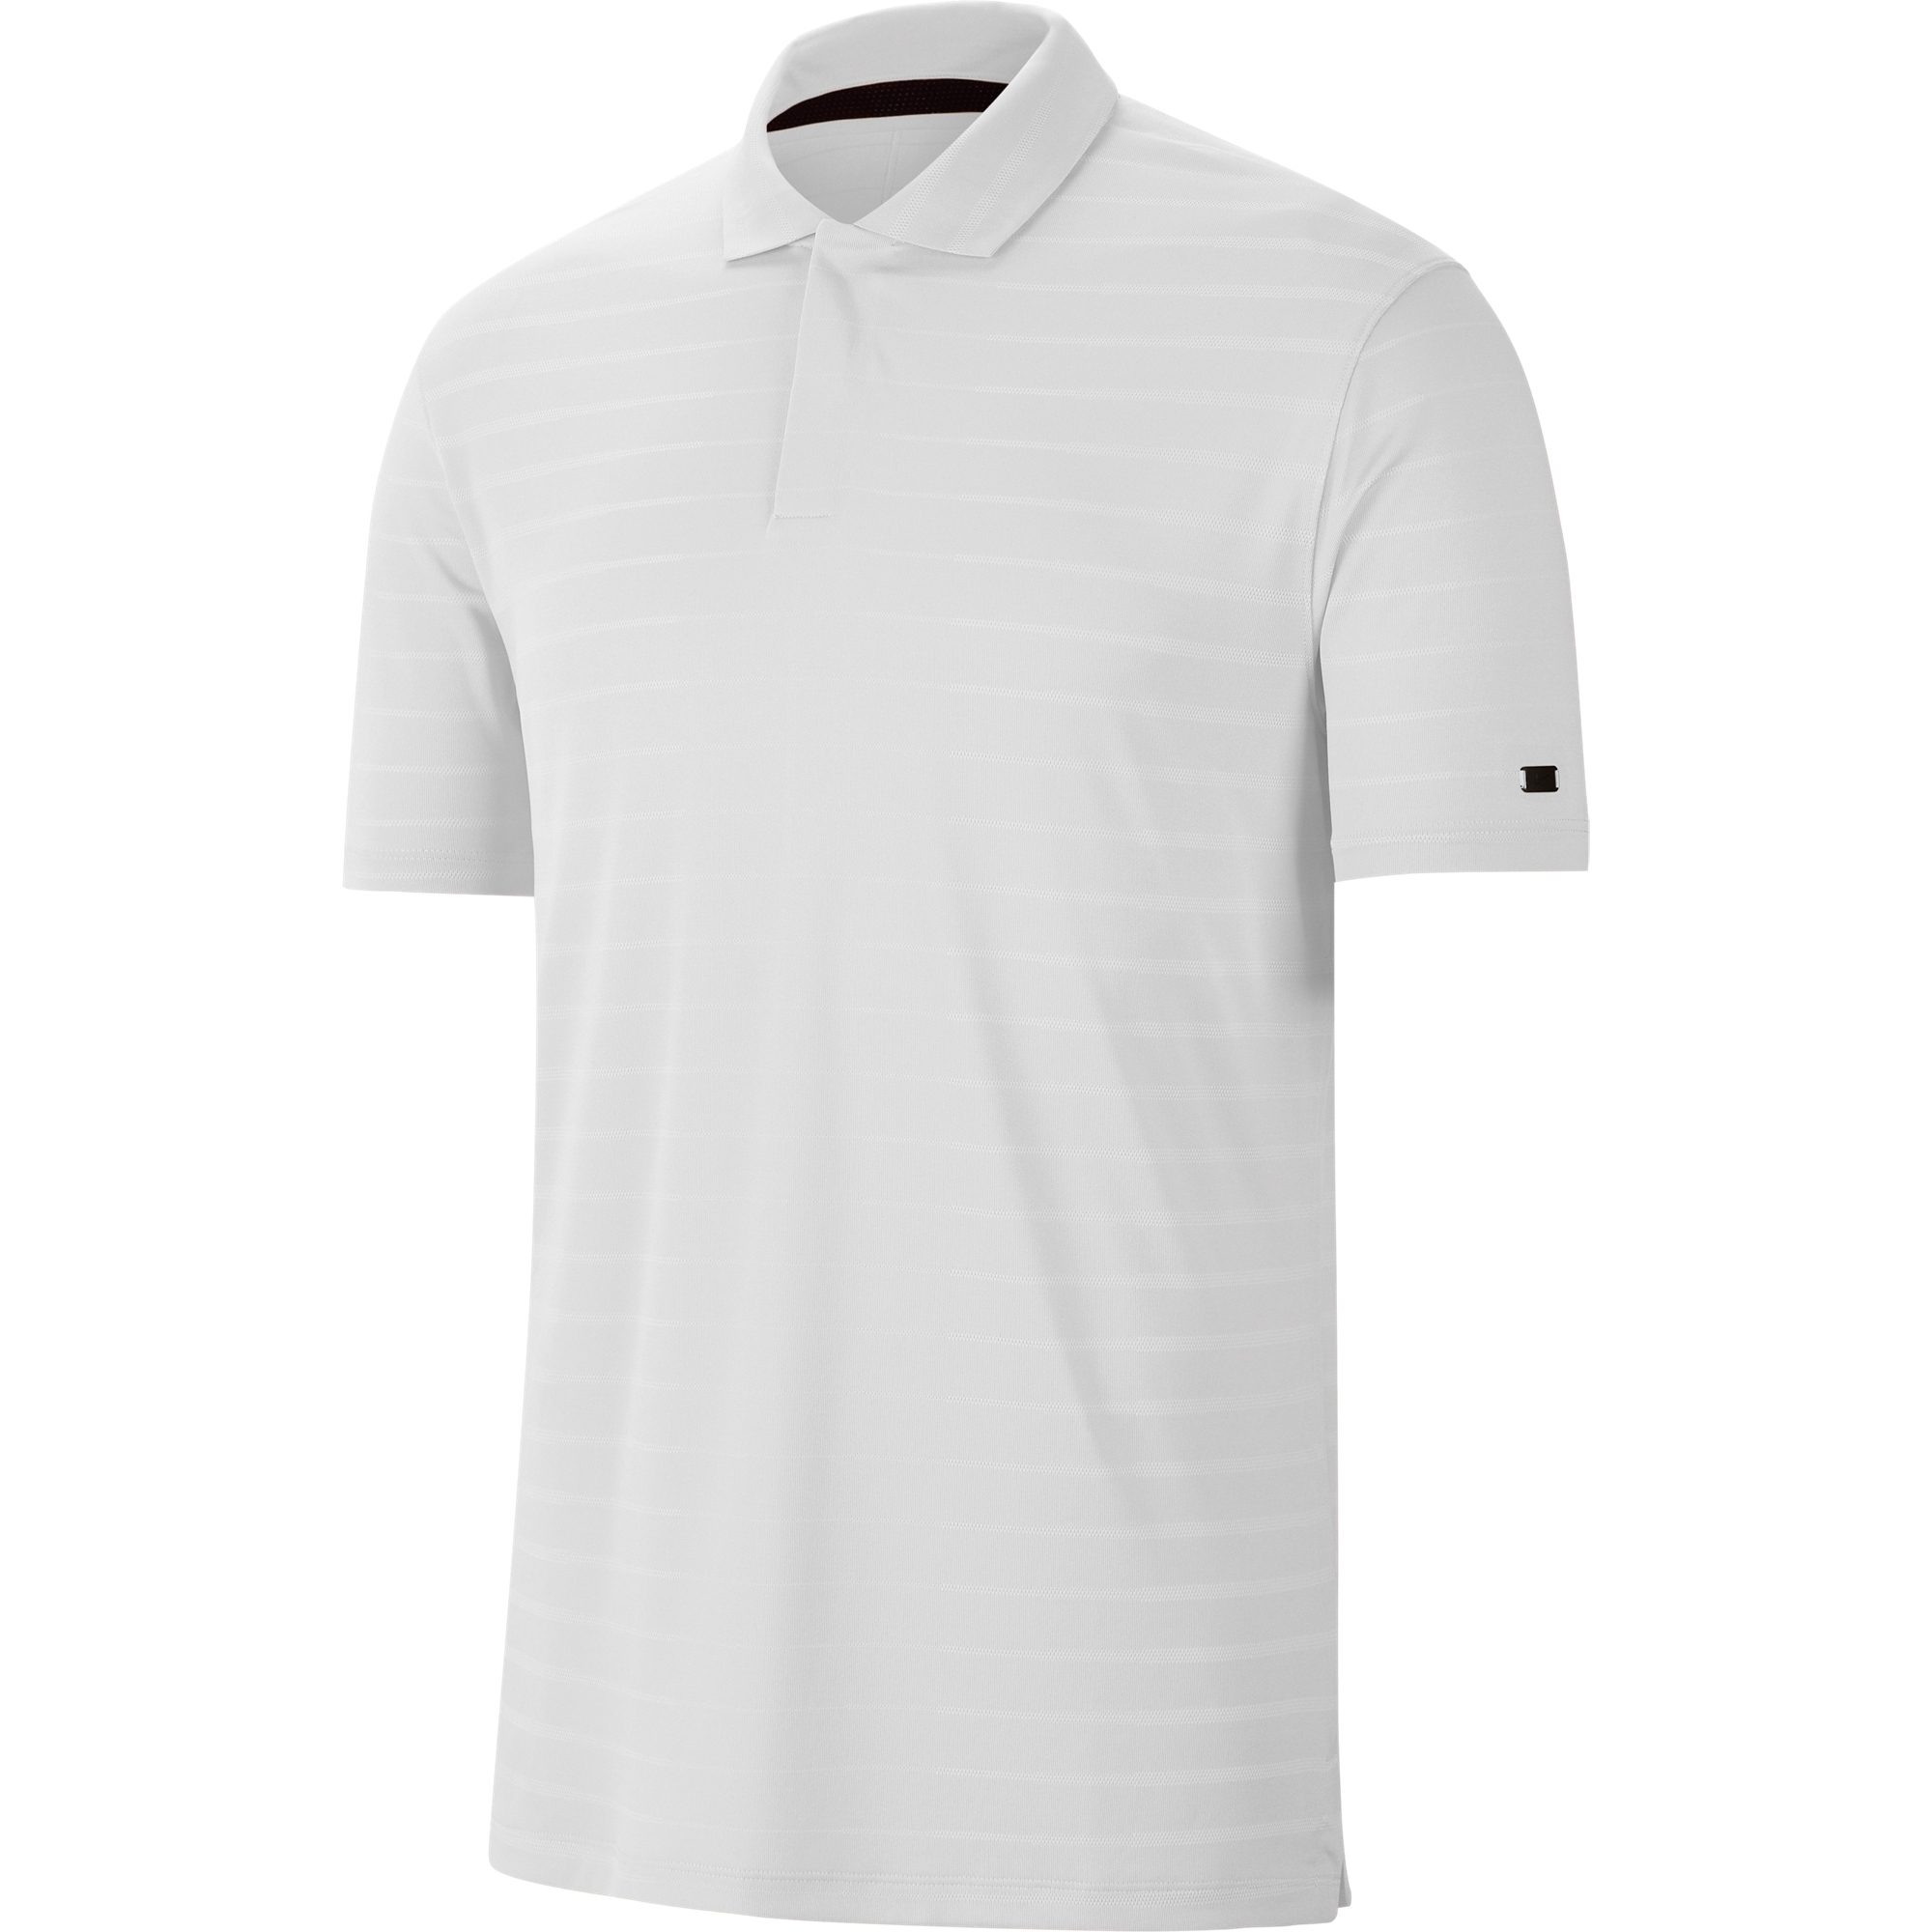 Nike Mens Dry Fit Sweat Wicking Golf Polo Shirt M- Chest 37.5-41’